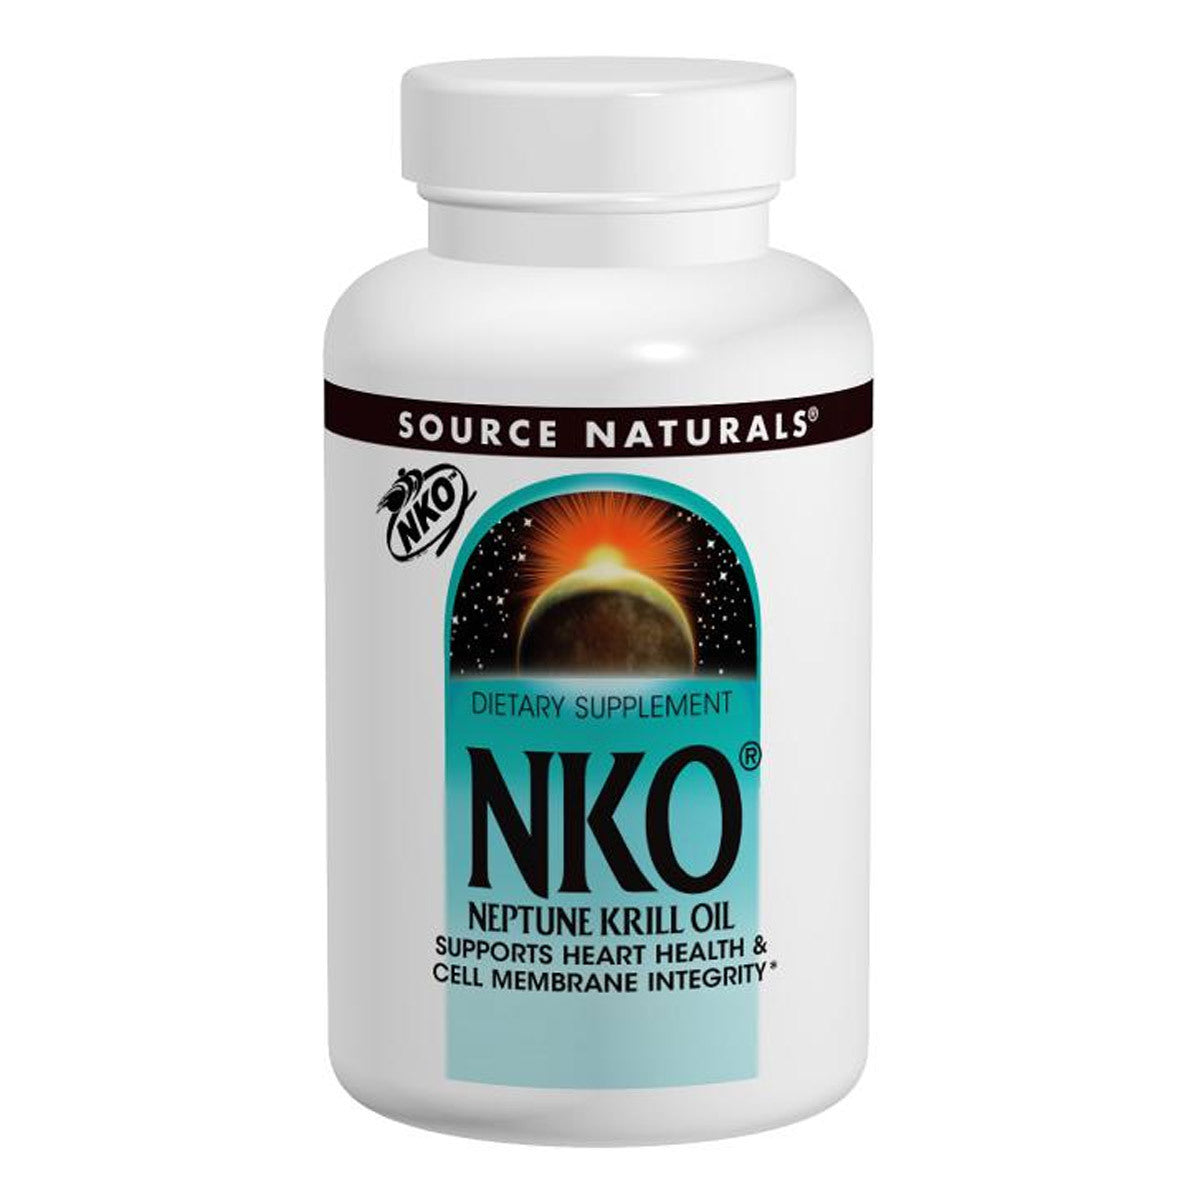 Primary image of Neptune Krill Oil 500mg Softgels